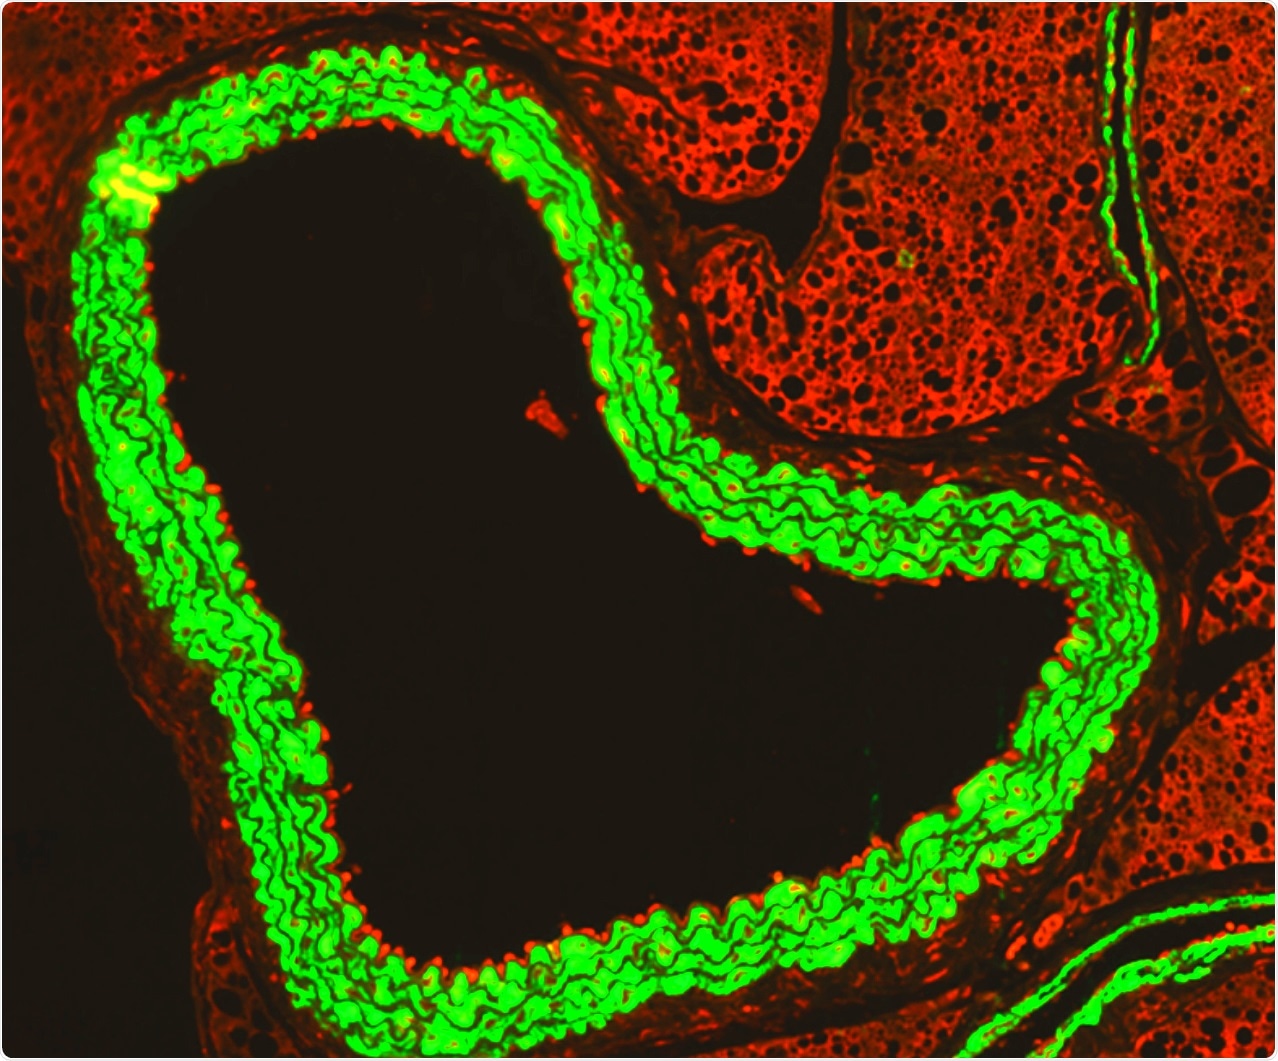 An immunofluorescence microscopy image shows how activated immune cells (red) ‘stick’ to the inside of the aorta (green) during flu infection in pregnancy.